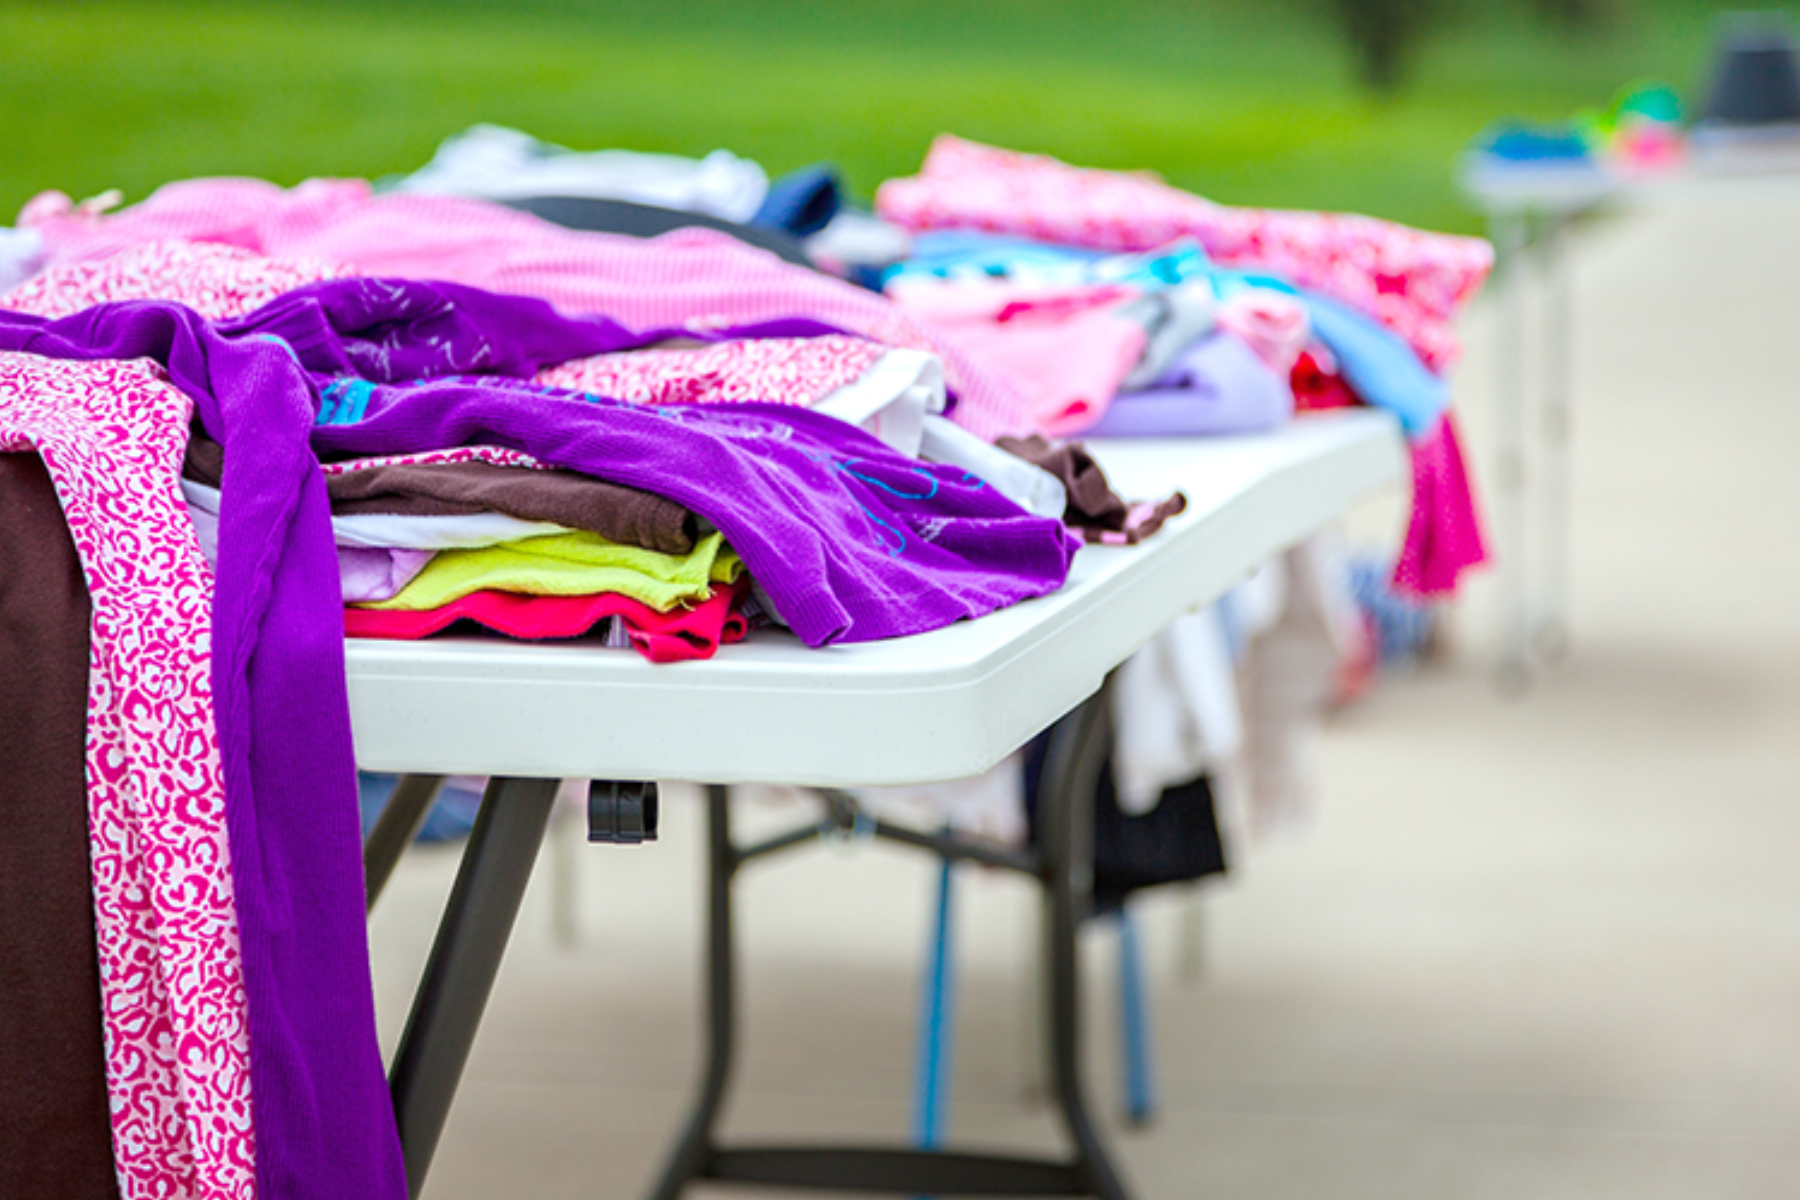 Various styles and colors of clothing were showcased during a garage sale